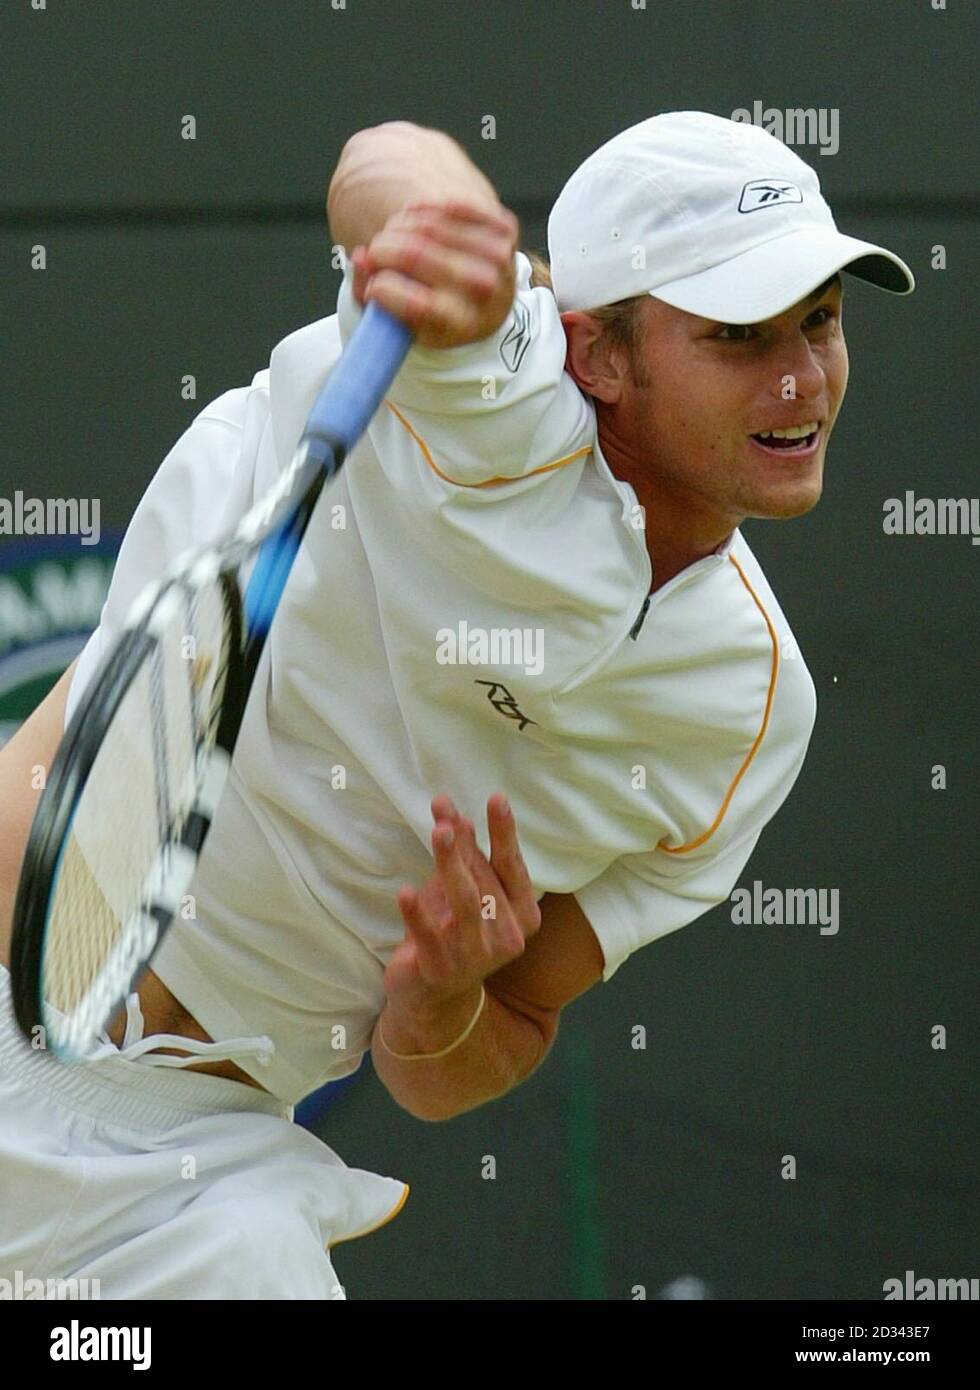 EDITORIAL USE ONLY, NO MOBILE PHONE USE. Andy Roddick from the USA in action against Jonas Bjorkman from Sweden during their quarter-final match at the All England Lawn Tennis Championships at Wimbledon. Stock Photo